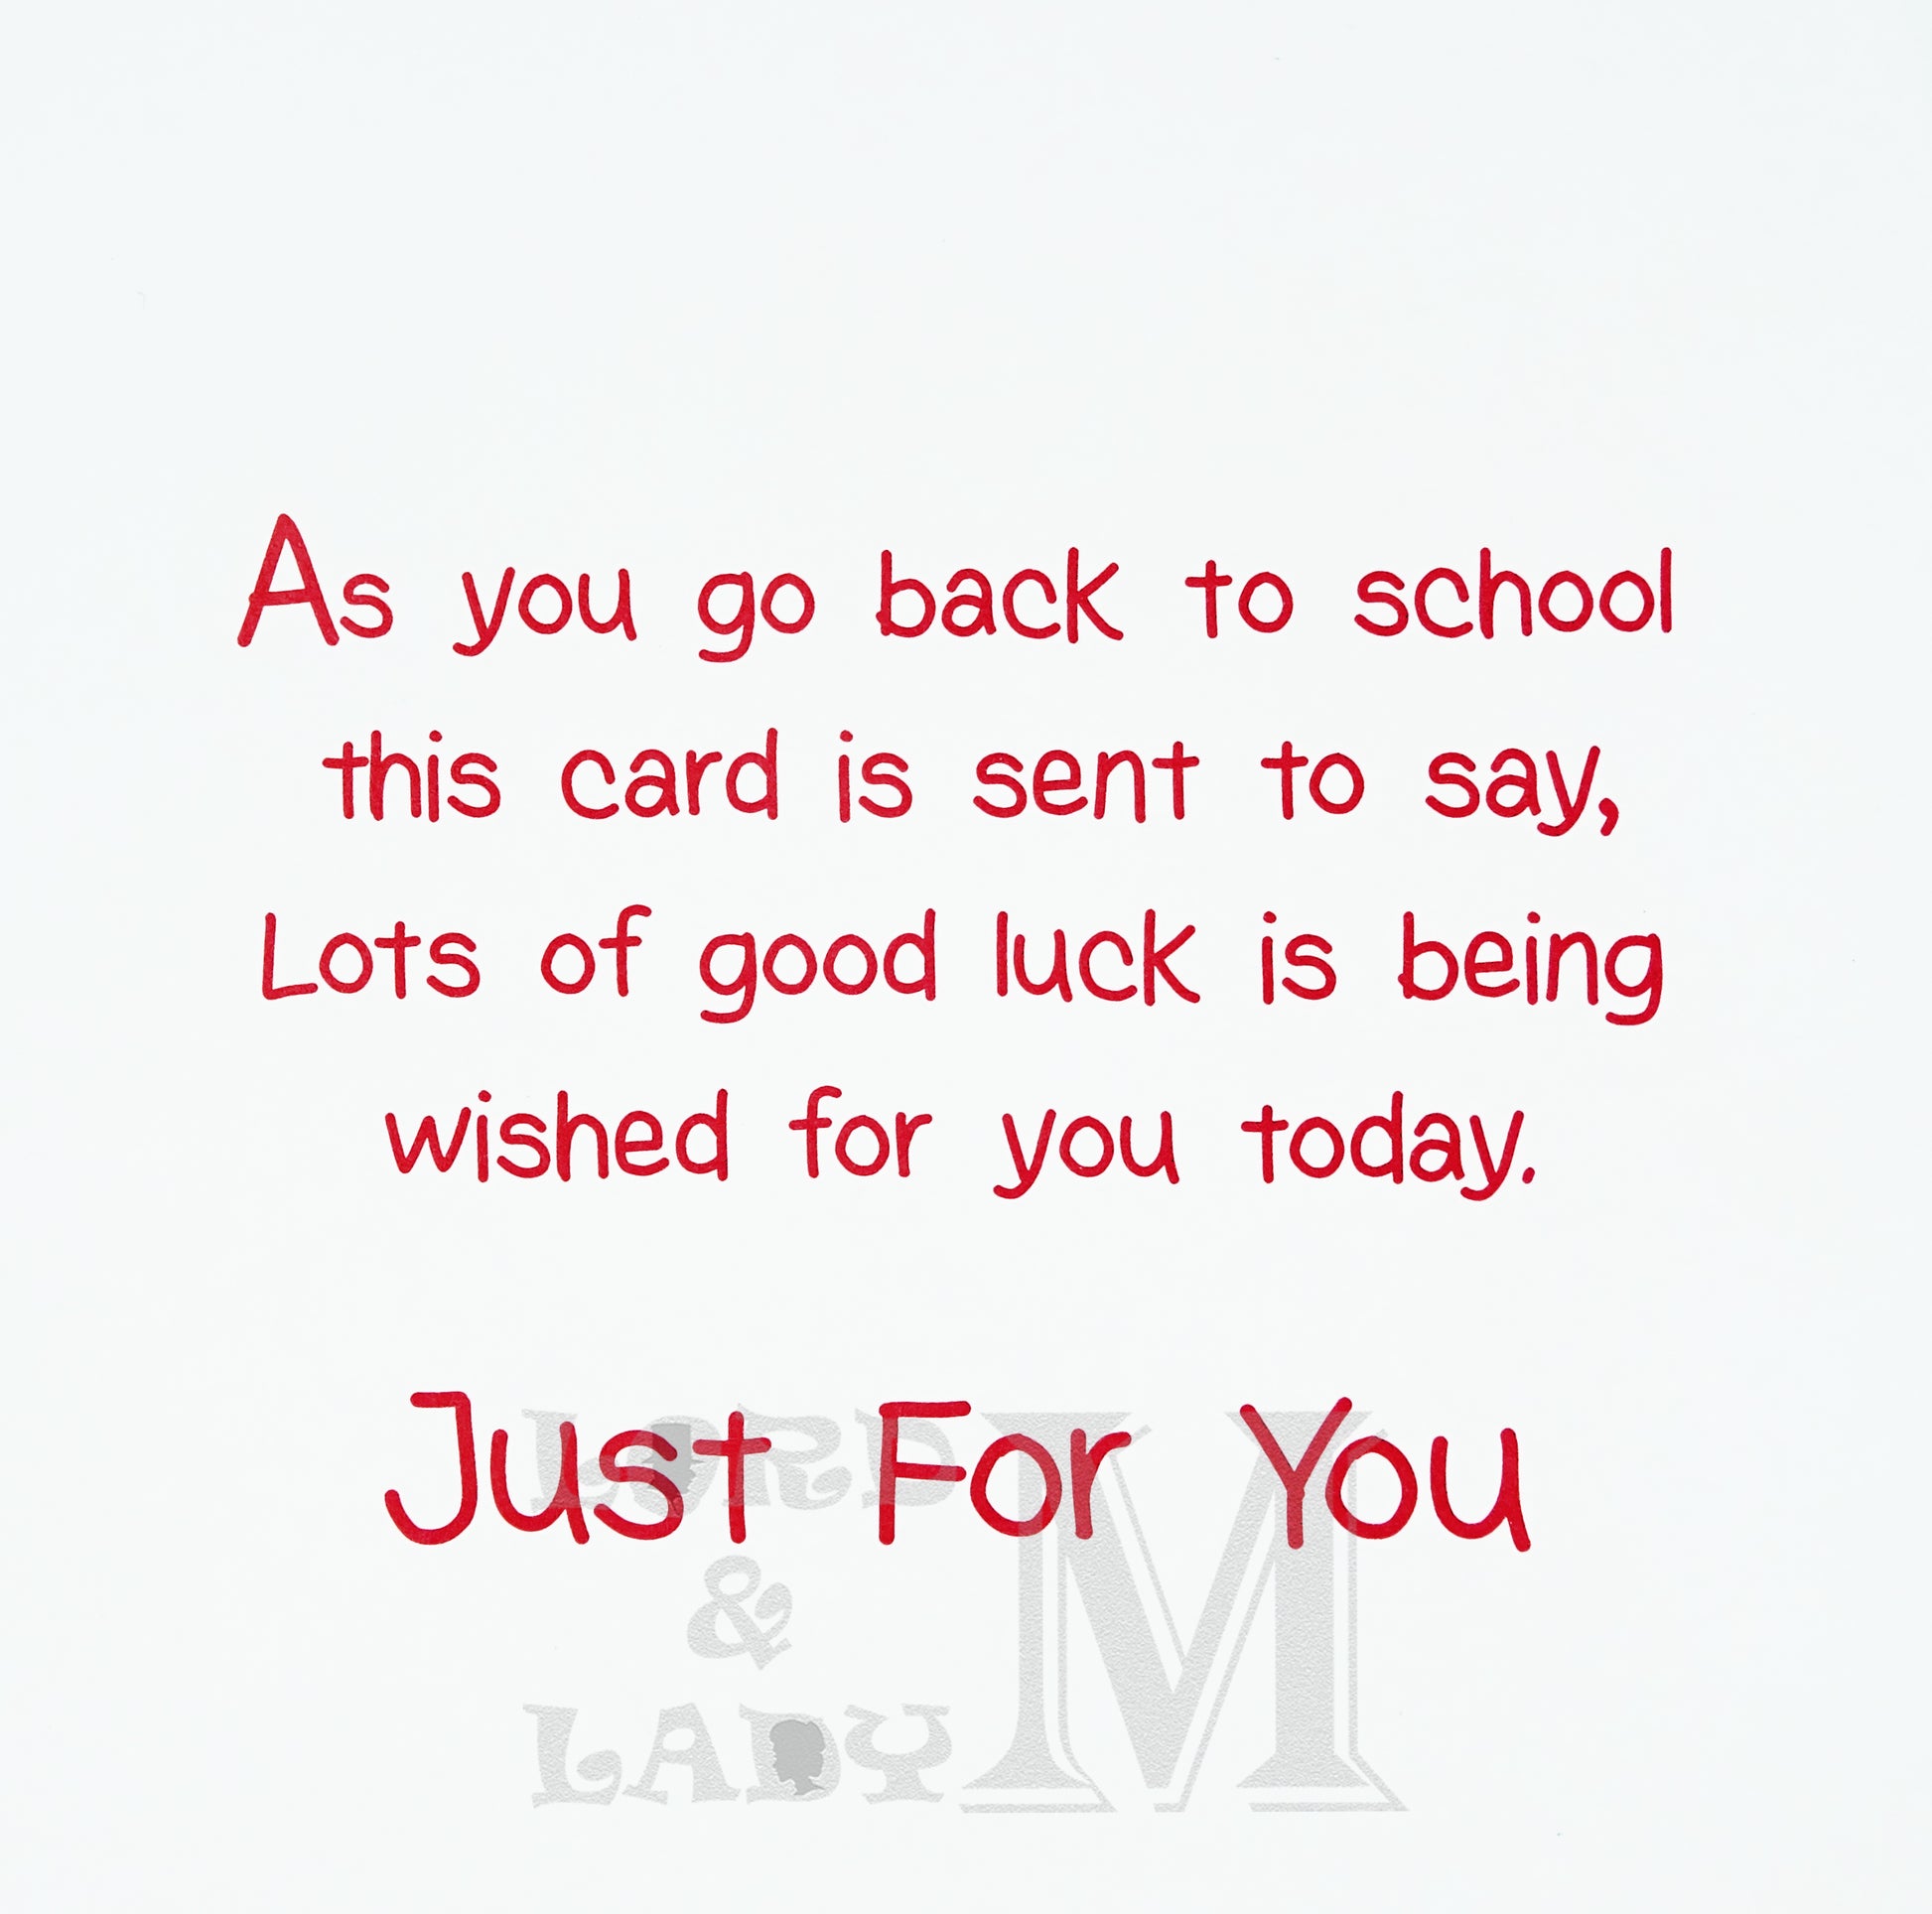 19cm - Good Luck As You Go Back To School - BGC